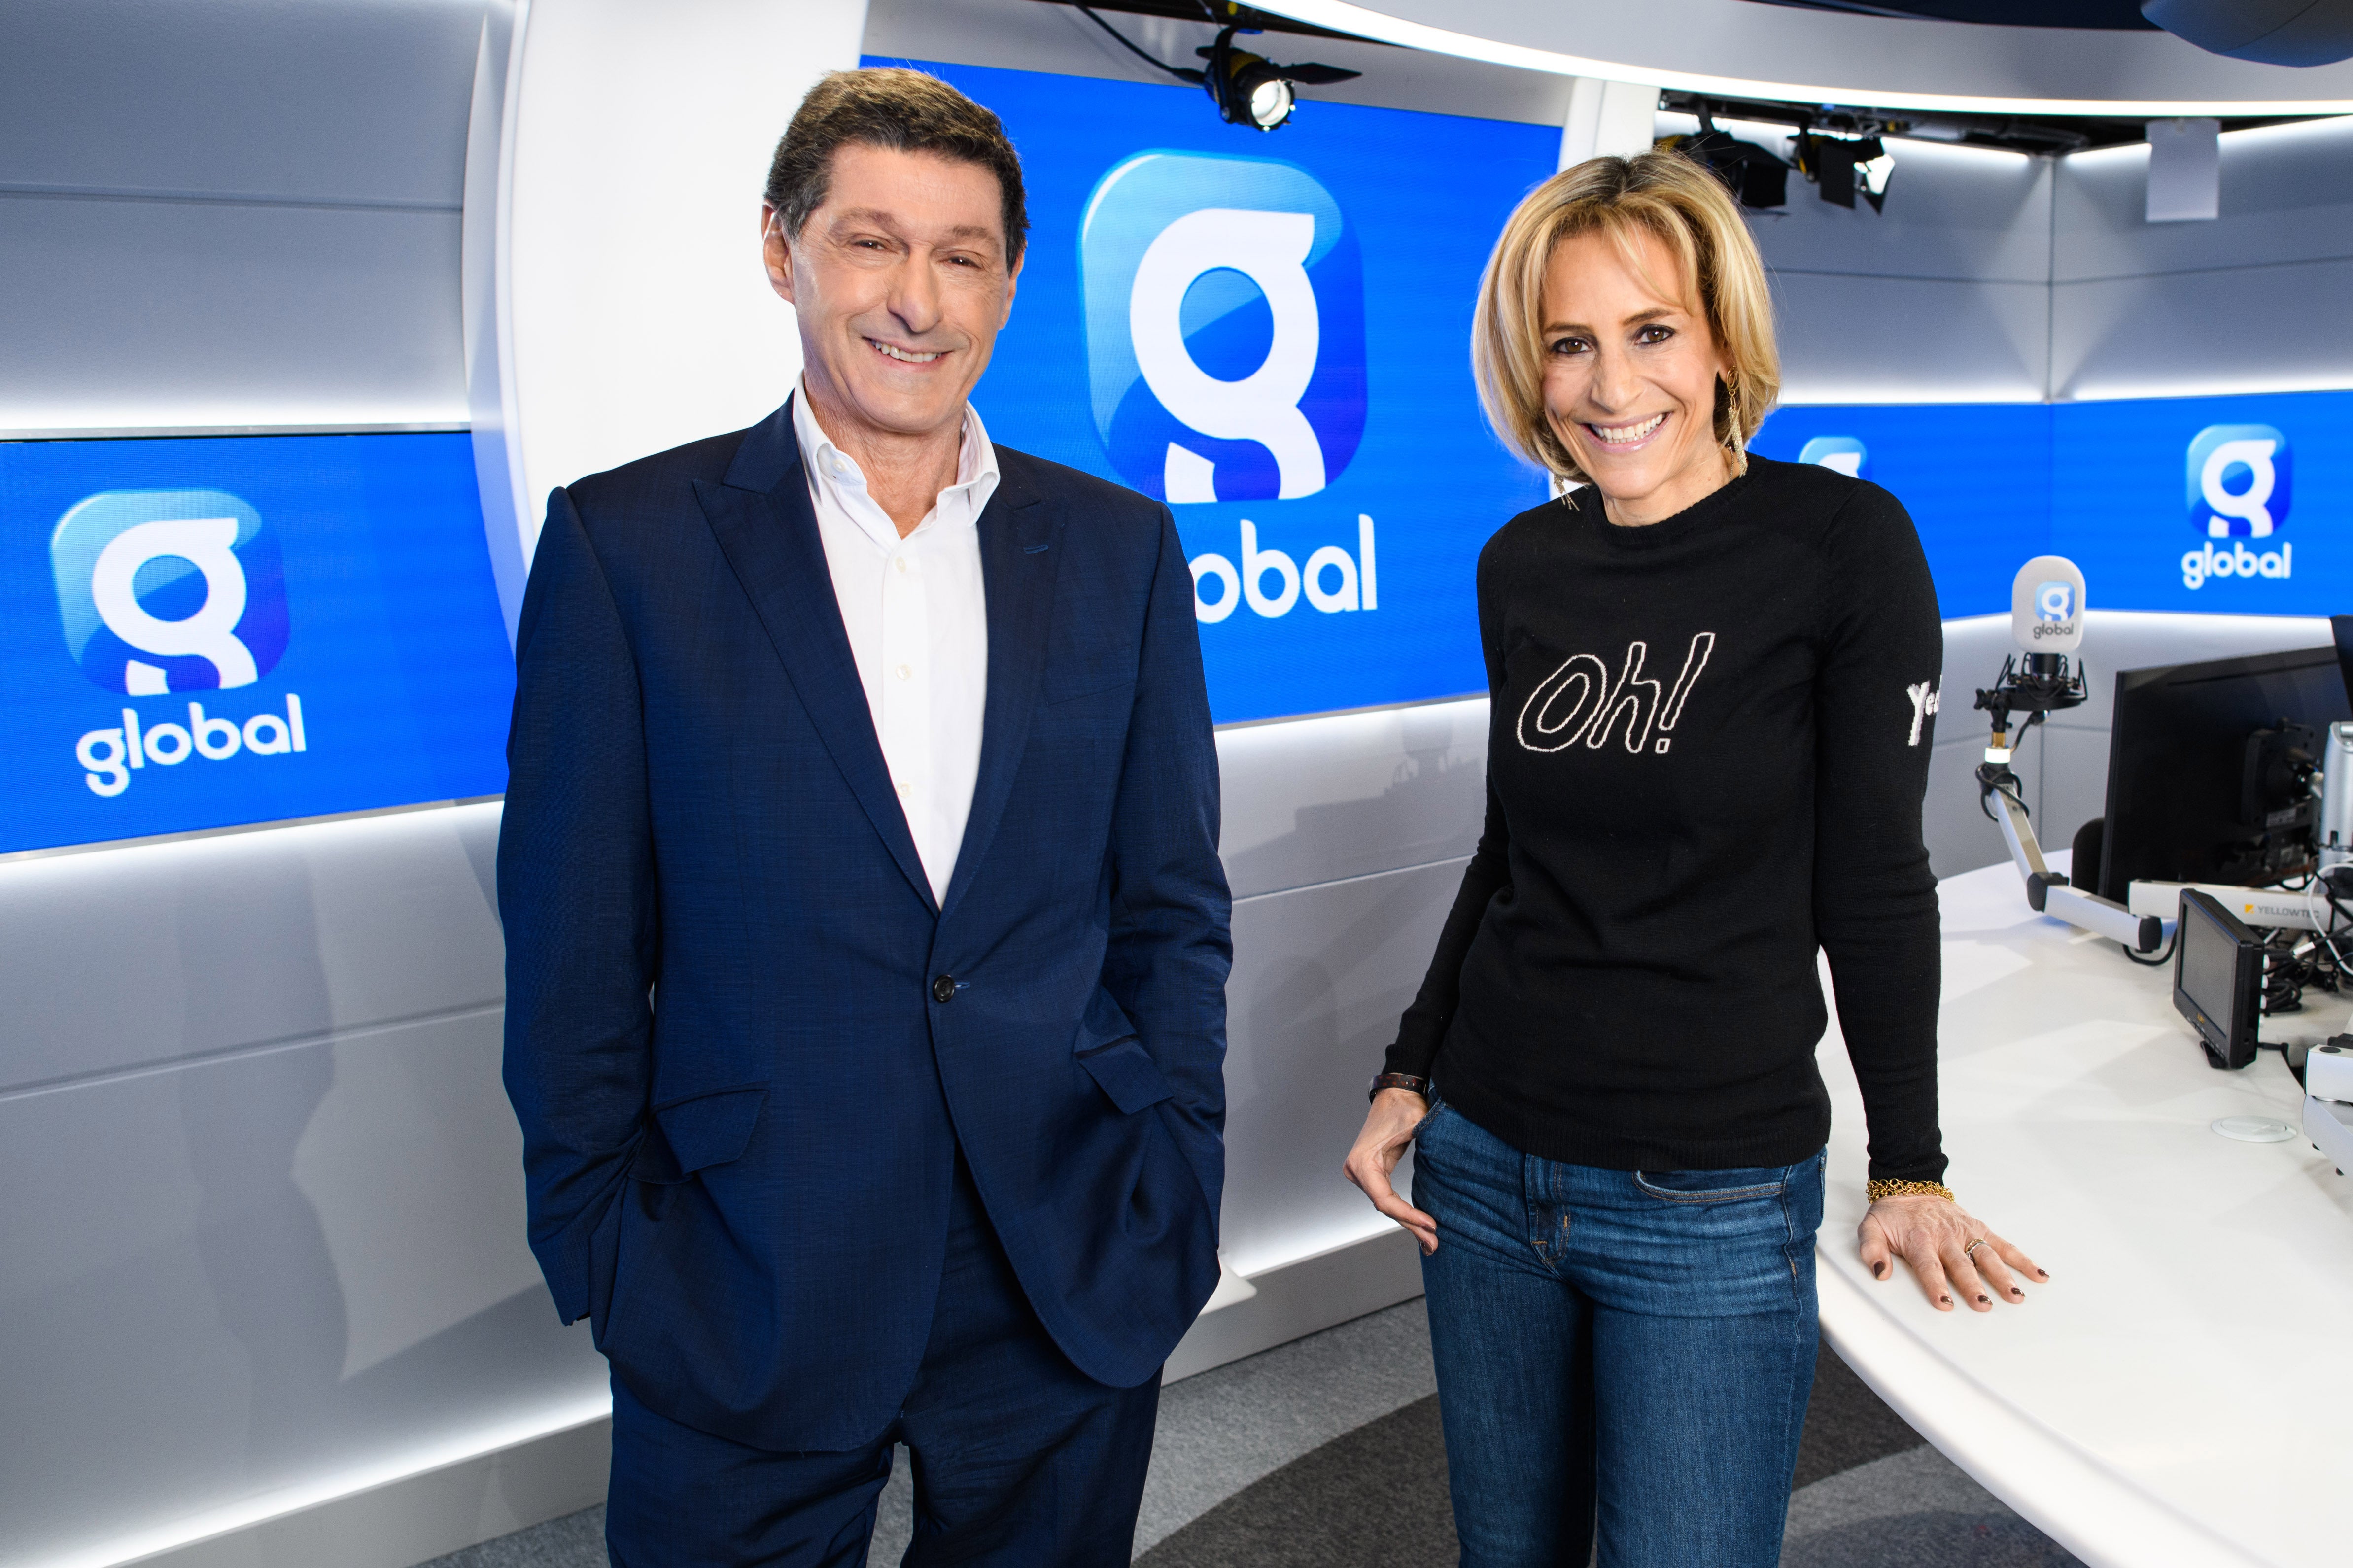 Jon Sopel and Emily Maitlis after they announced they are leaving the BBC to join media group Global (Global/PA)